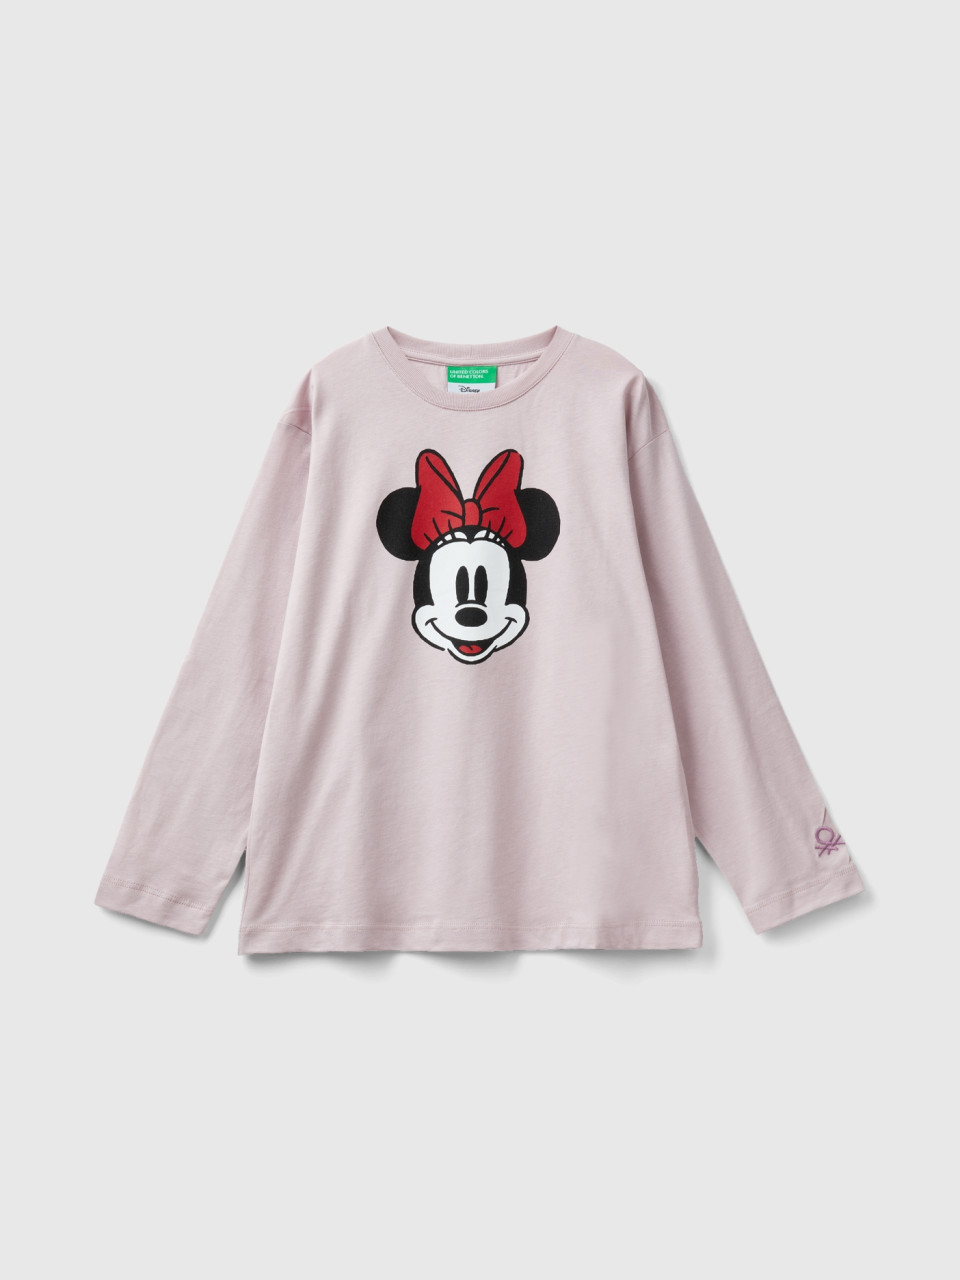 Benetton, Pink T-shirt With Minnie Mouse Print, Pink, Kids